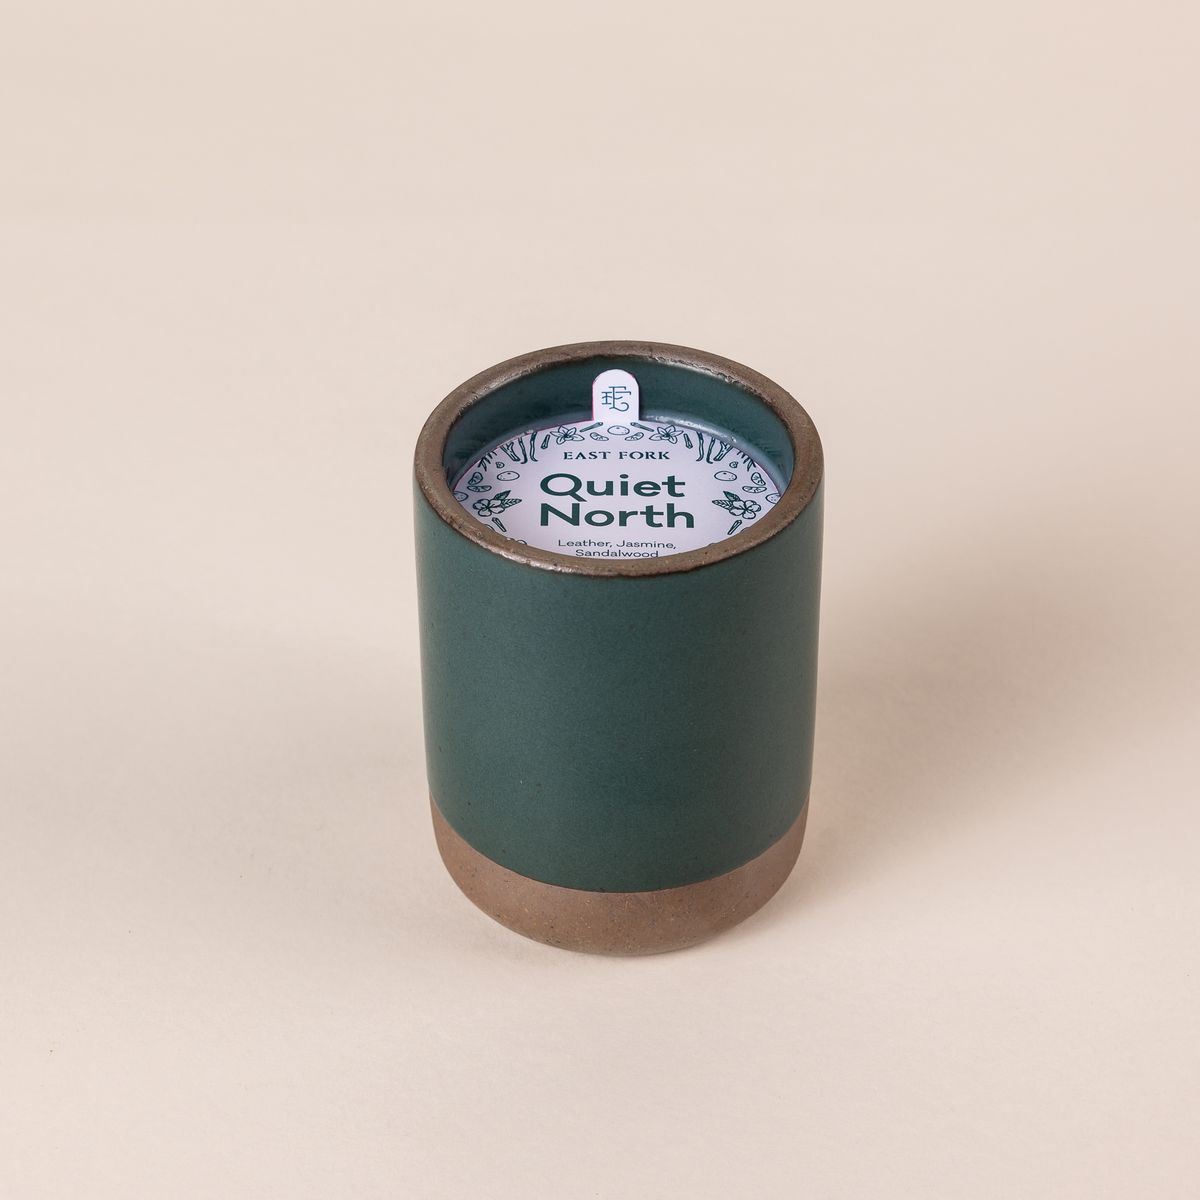 Large ceramic vessel in a deep dark teal color with candle inside. On top is a packaging label sitting on top that reads "Quiet North"